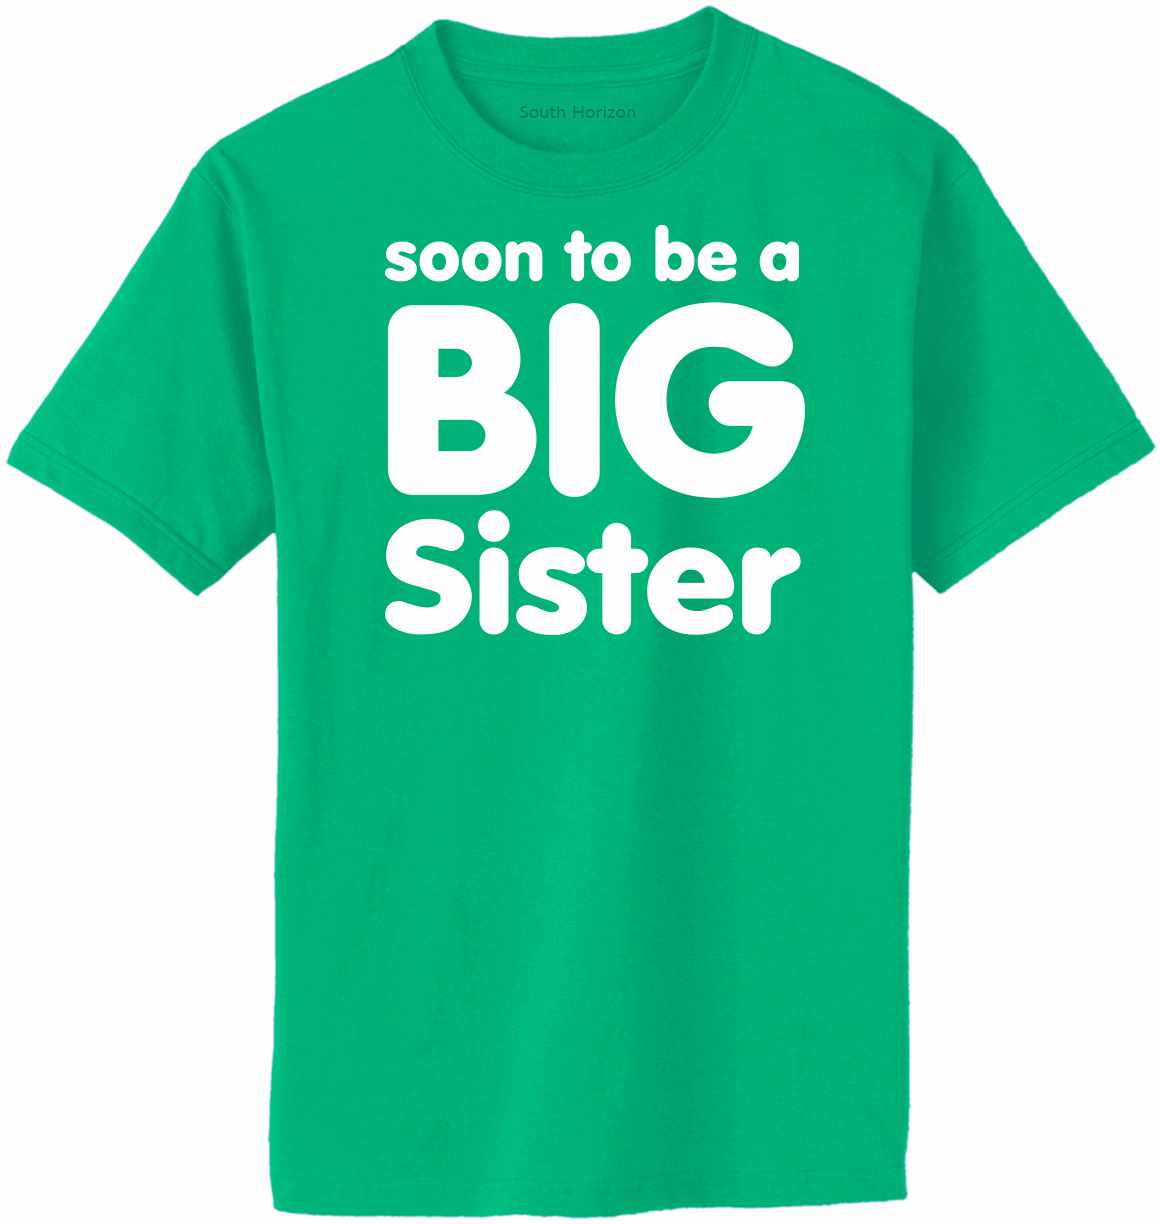 Soon to be a BIG SISTER Adult T-Shirt (#714-1)